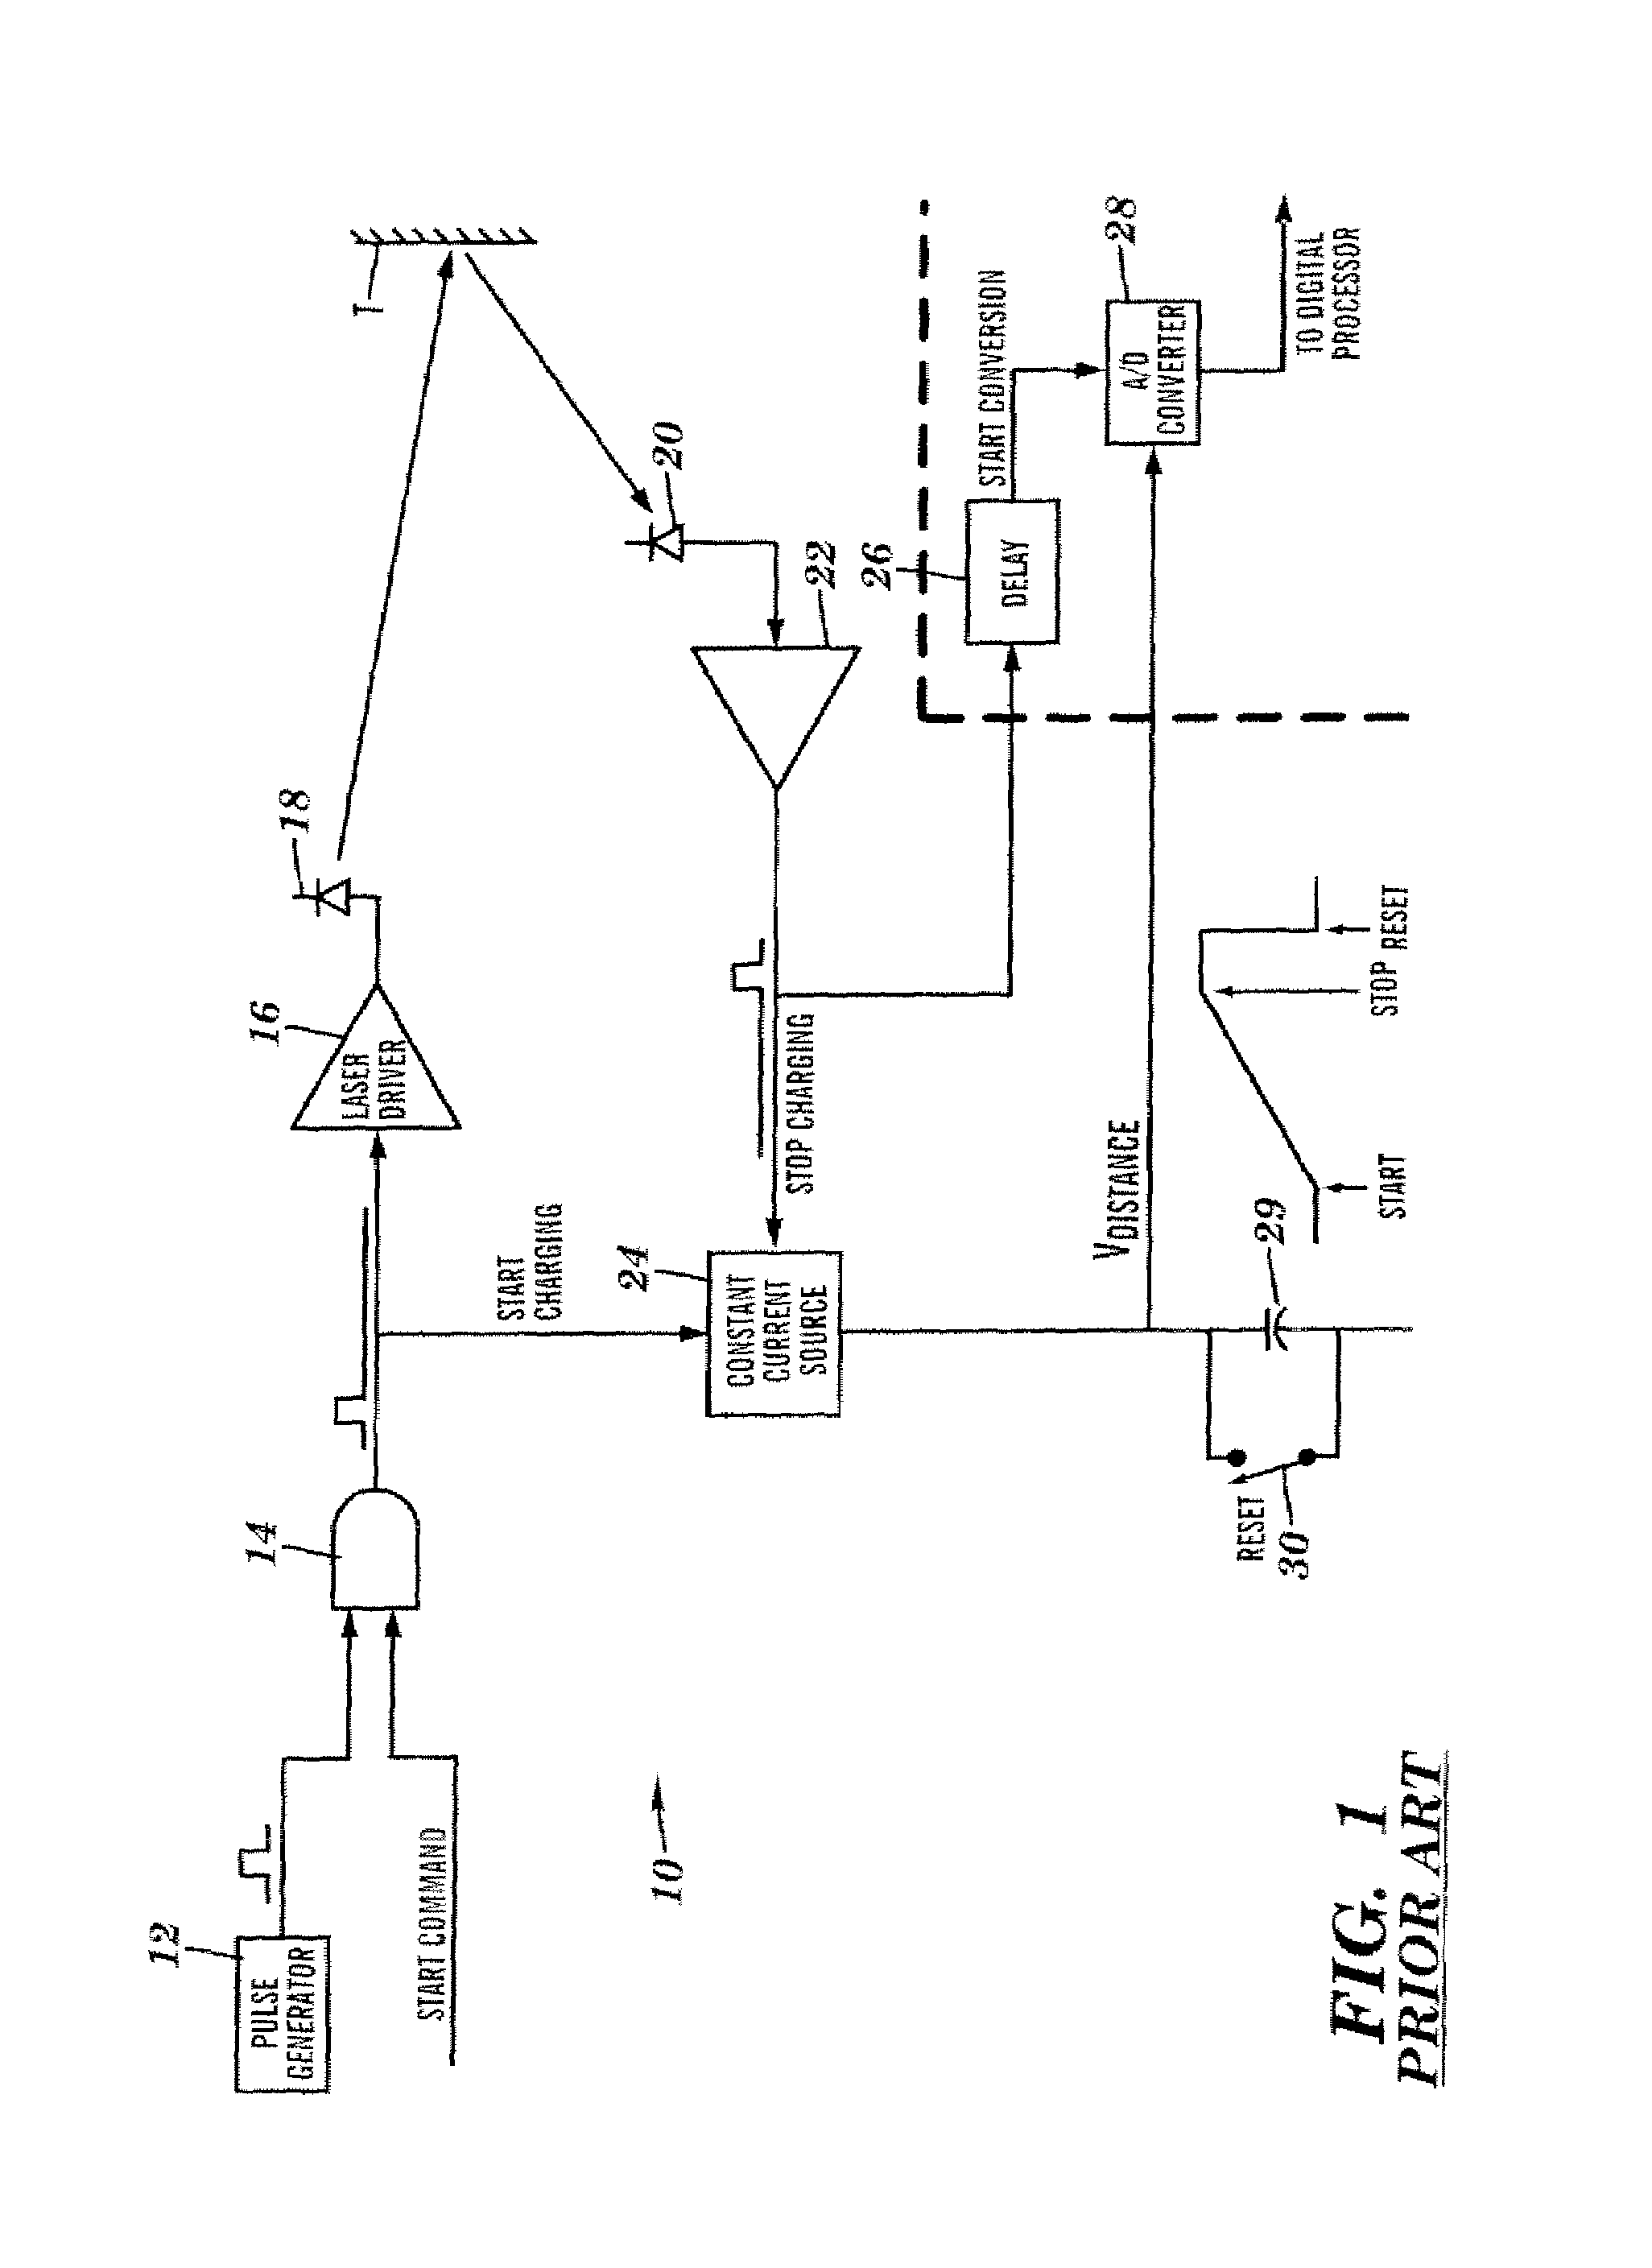 Apparatus for high accuracy distance and velocity measurement and methods thereof